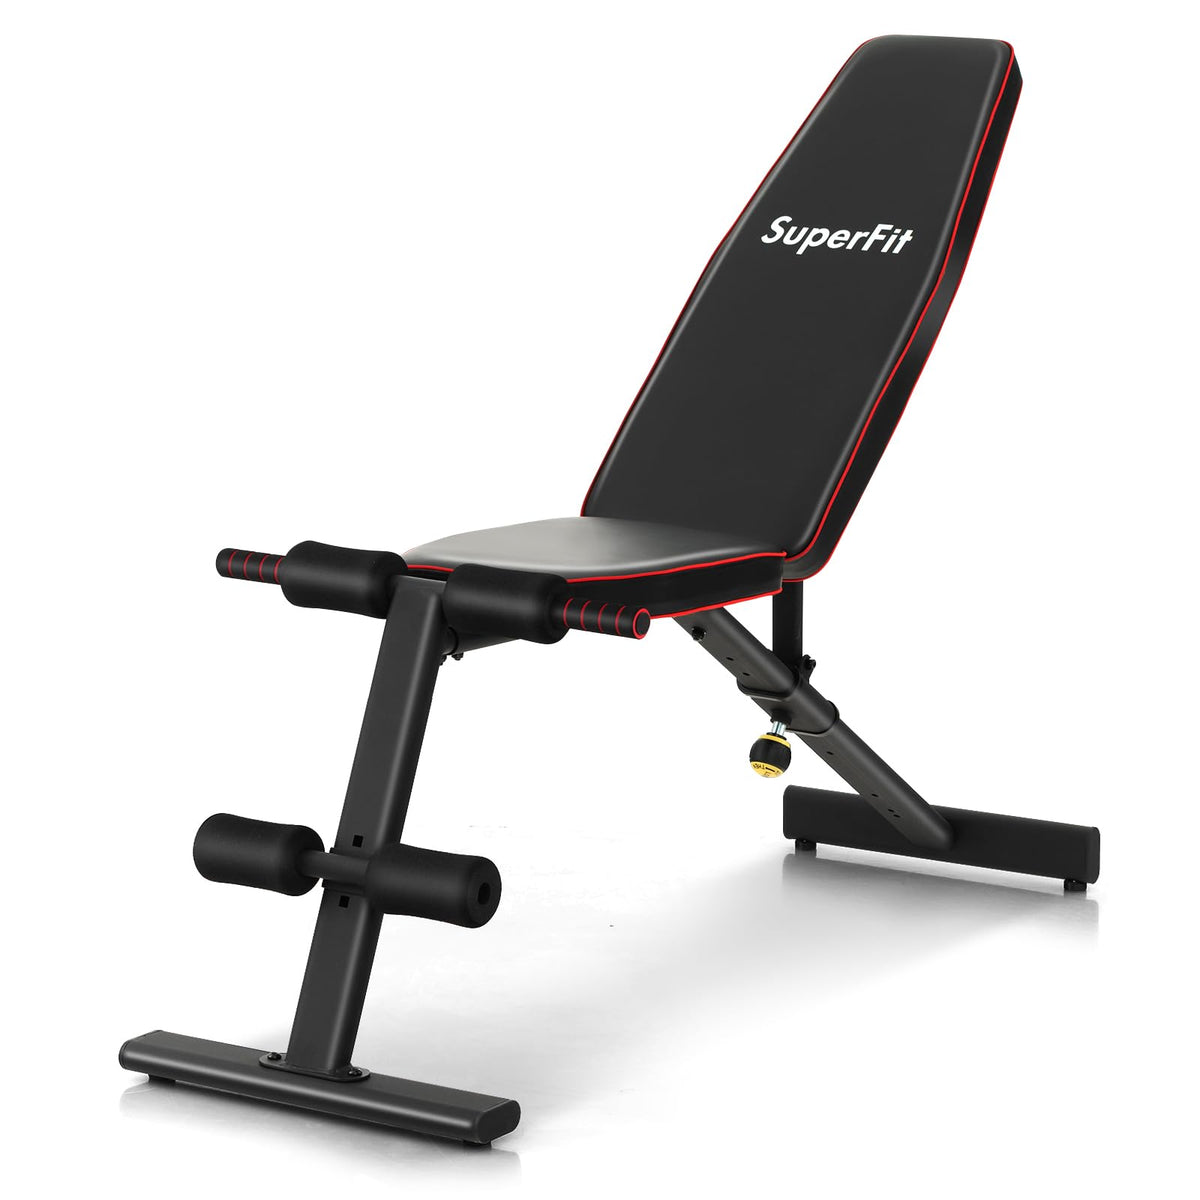 Goplus Adjustable Weight Bench, Heavy Duty Exercise Bench Press for Full Body Strength Training